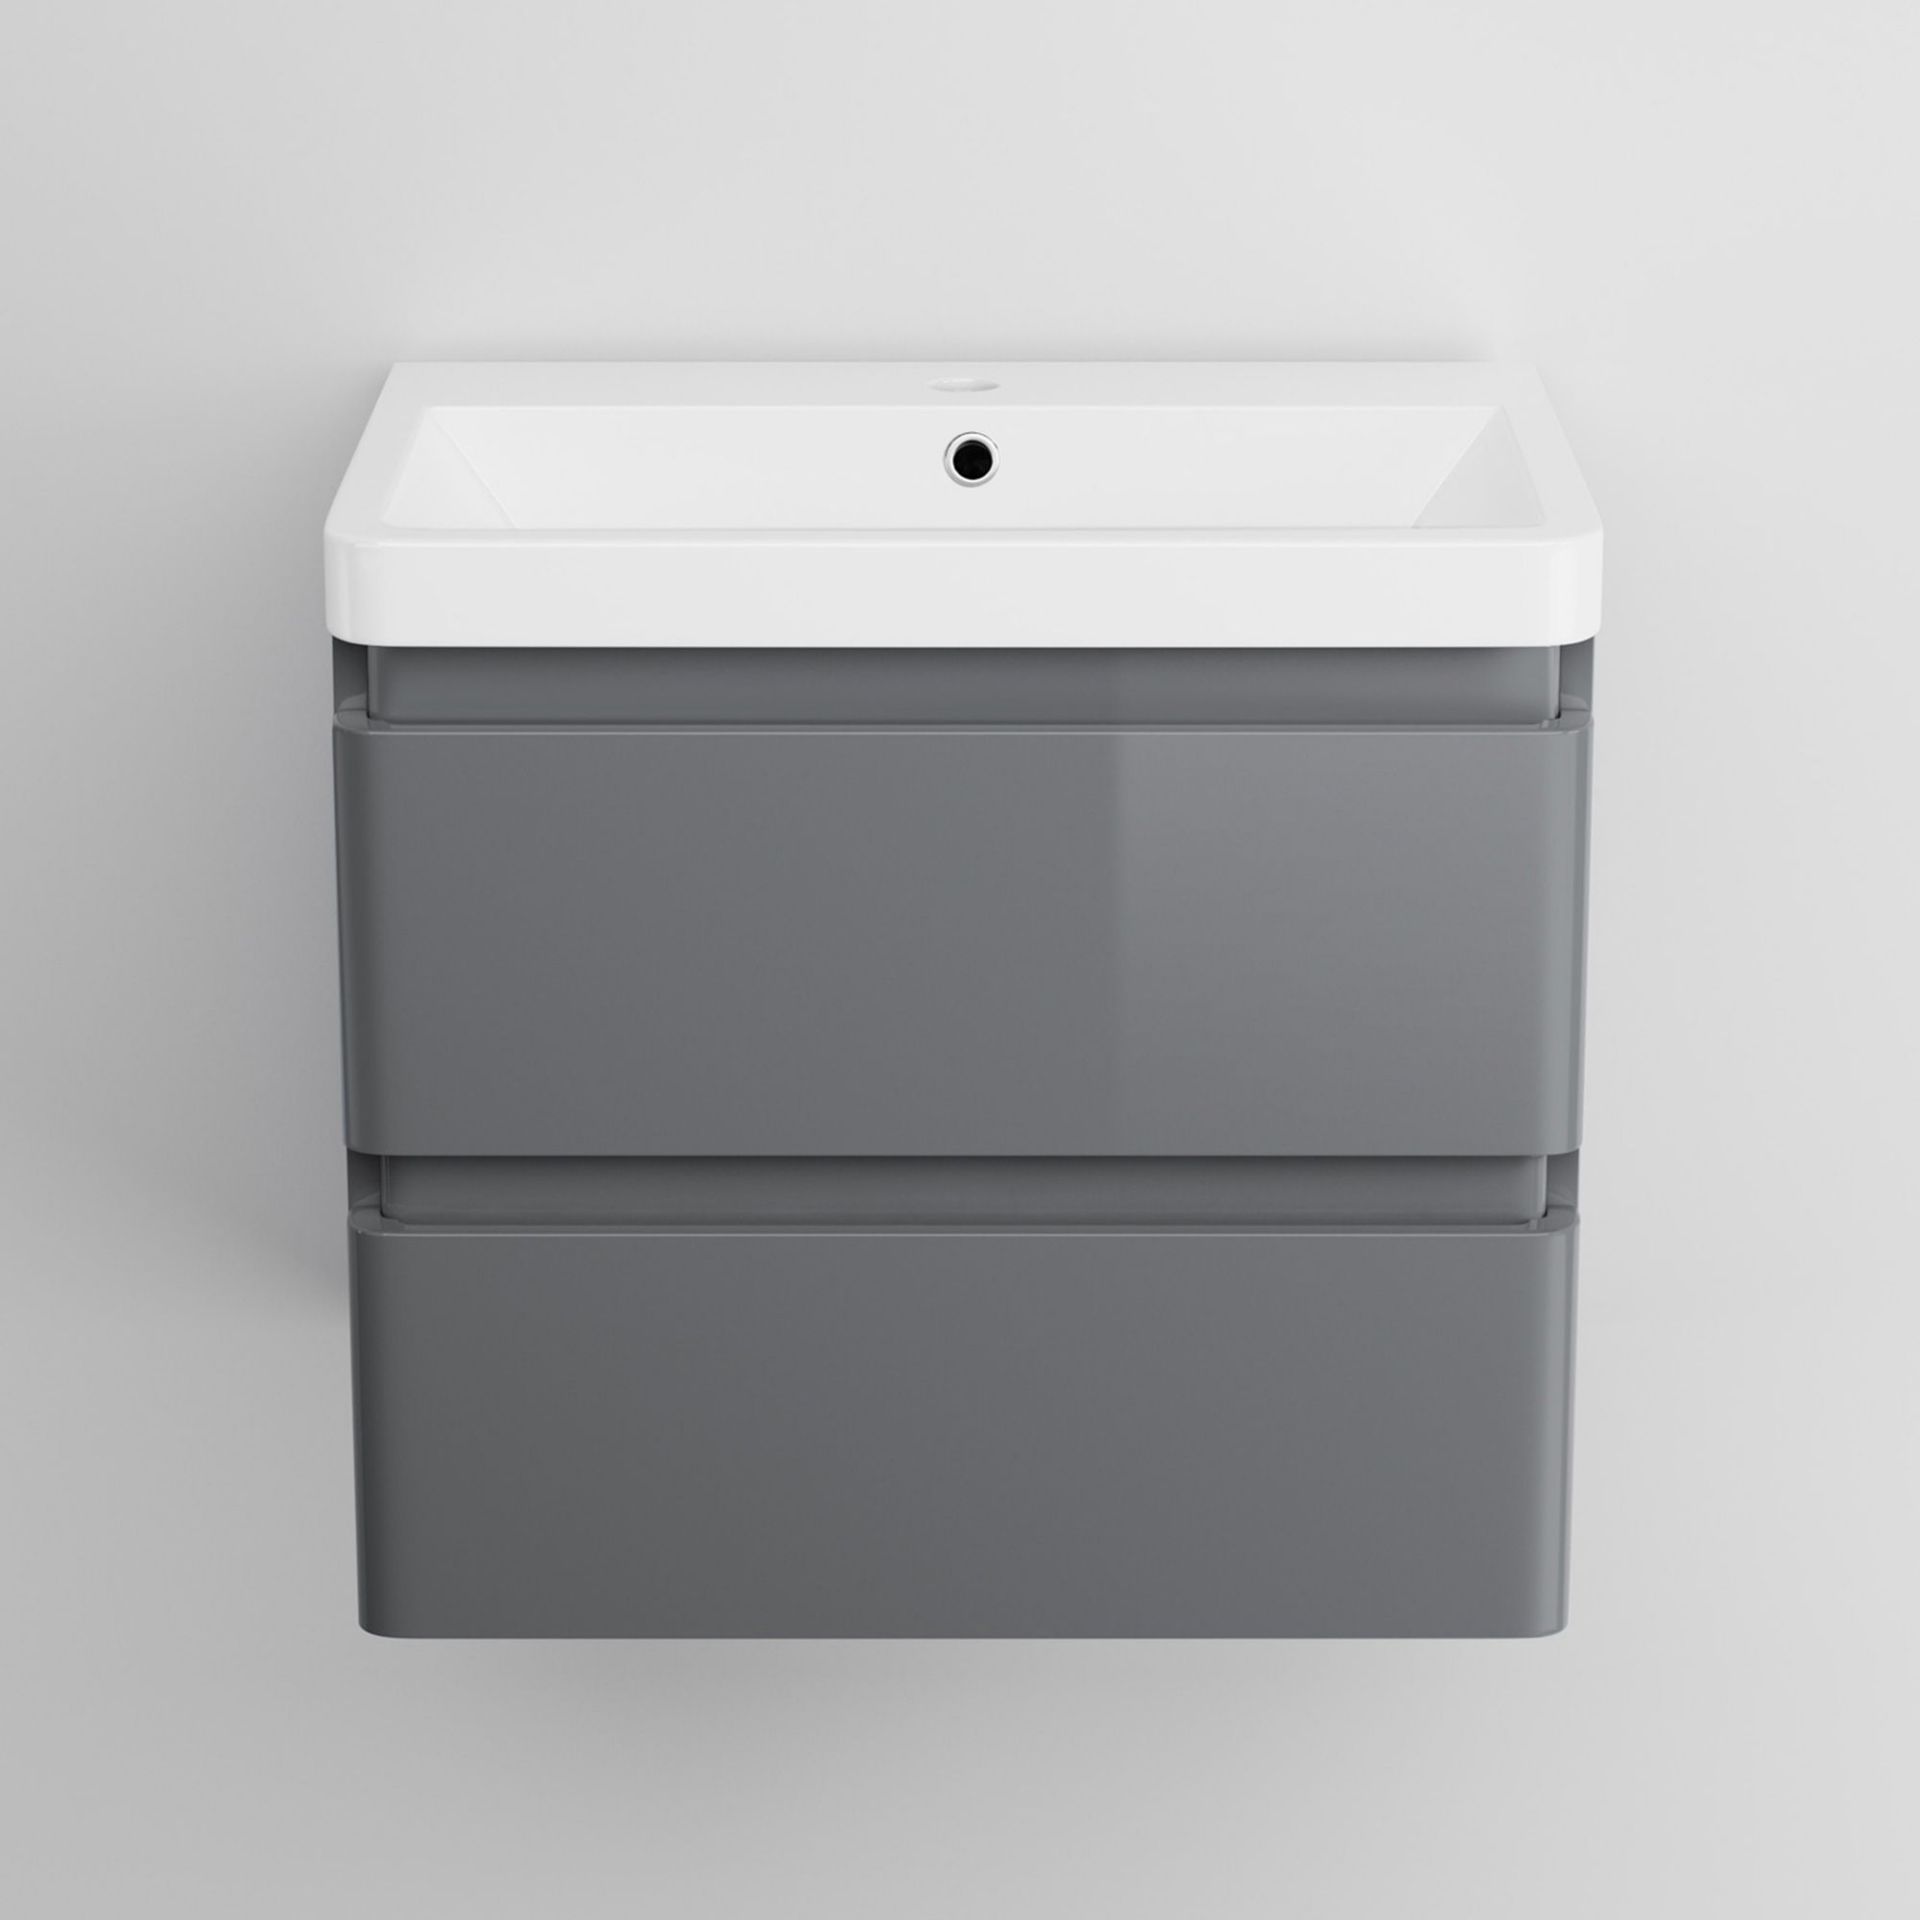 New & Boxed 600mm Denver II Grey Built In Basin Drawer Unit - Wall Hung. RRP £849.99 Mf2402.With - Image 2 of 2